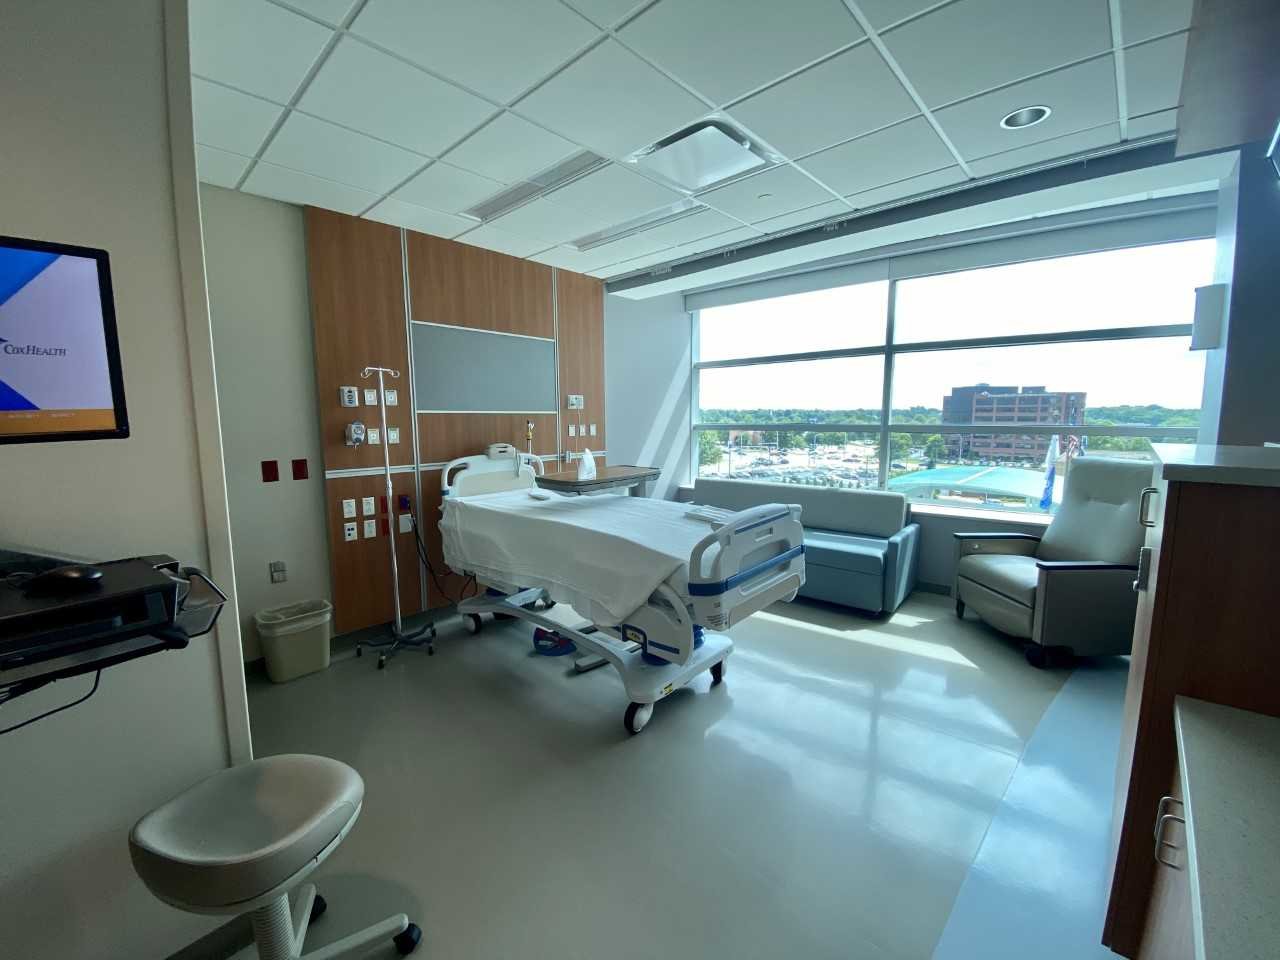 The new unit includes recovery areas for cardiovascular procedure patients.